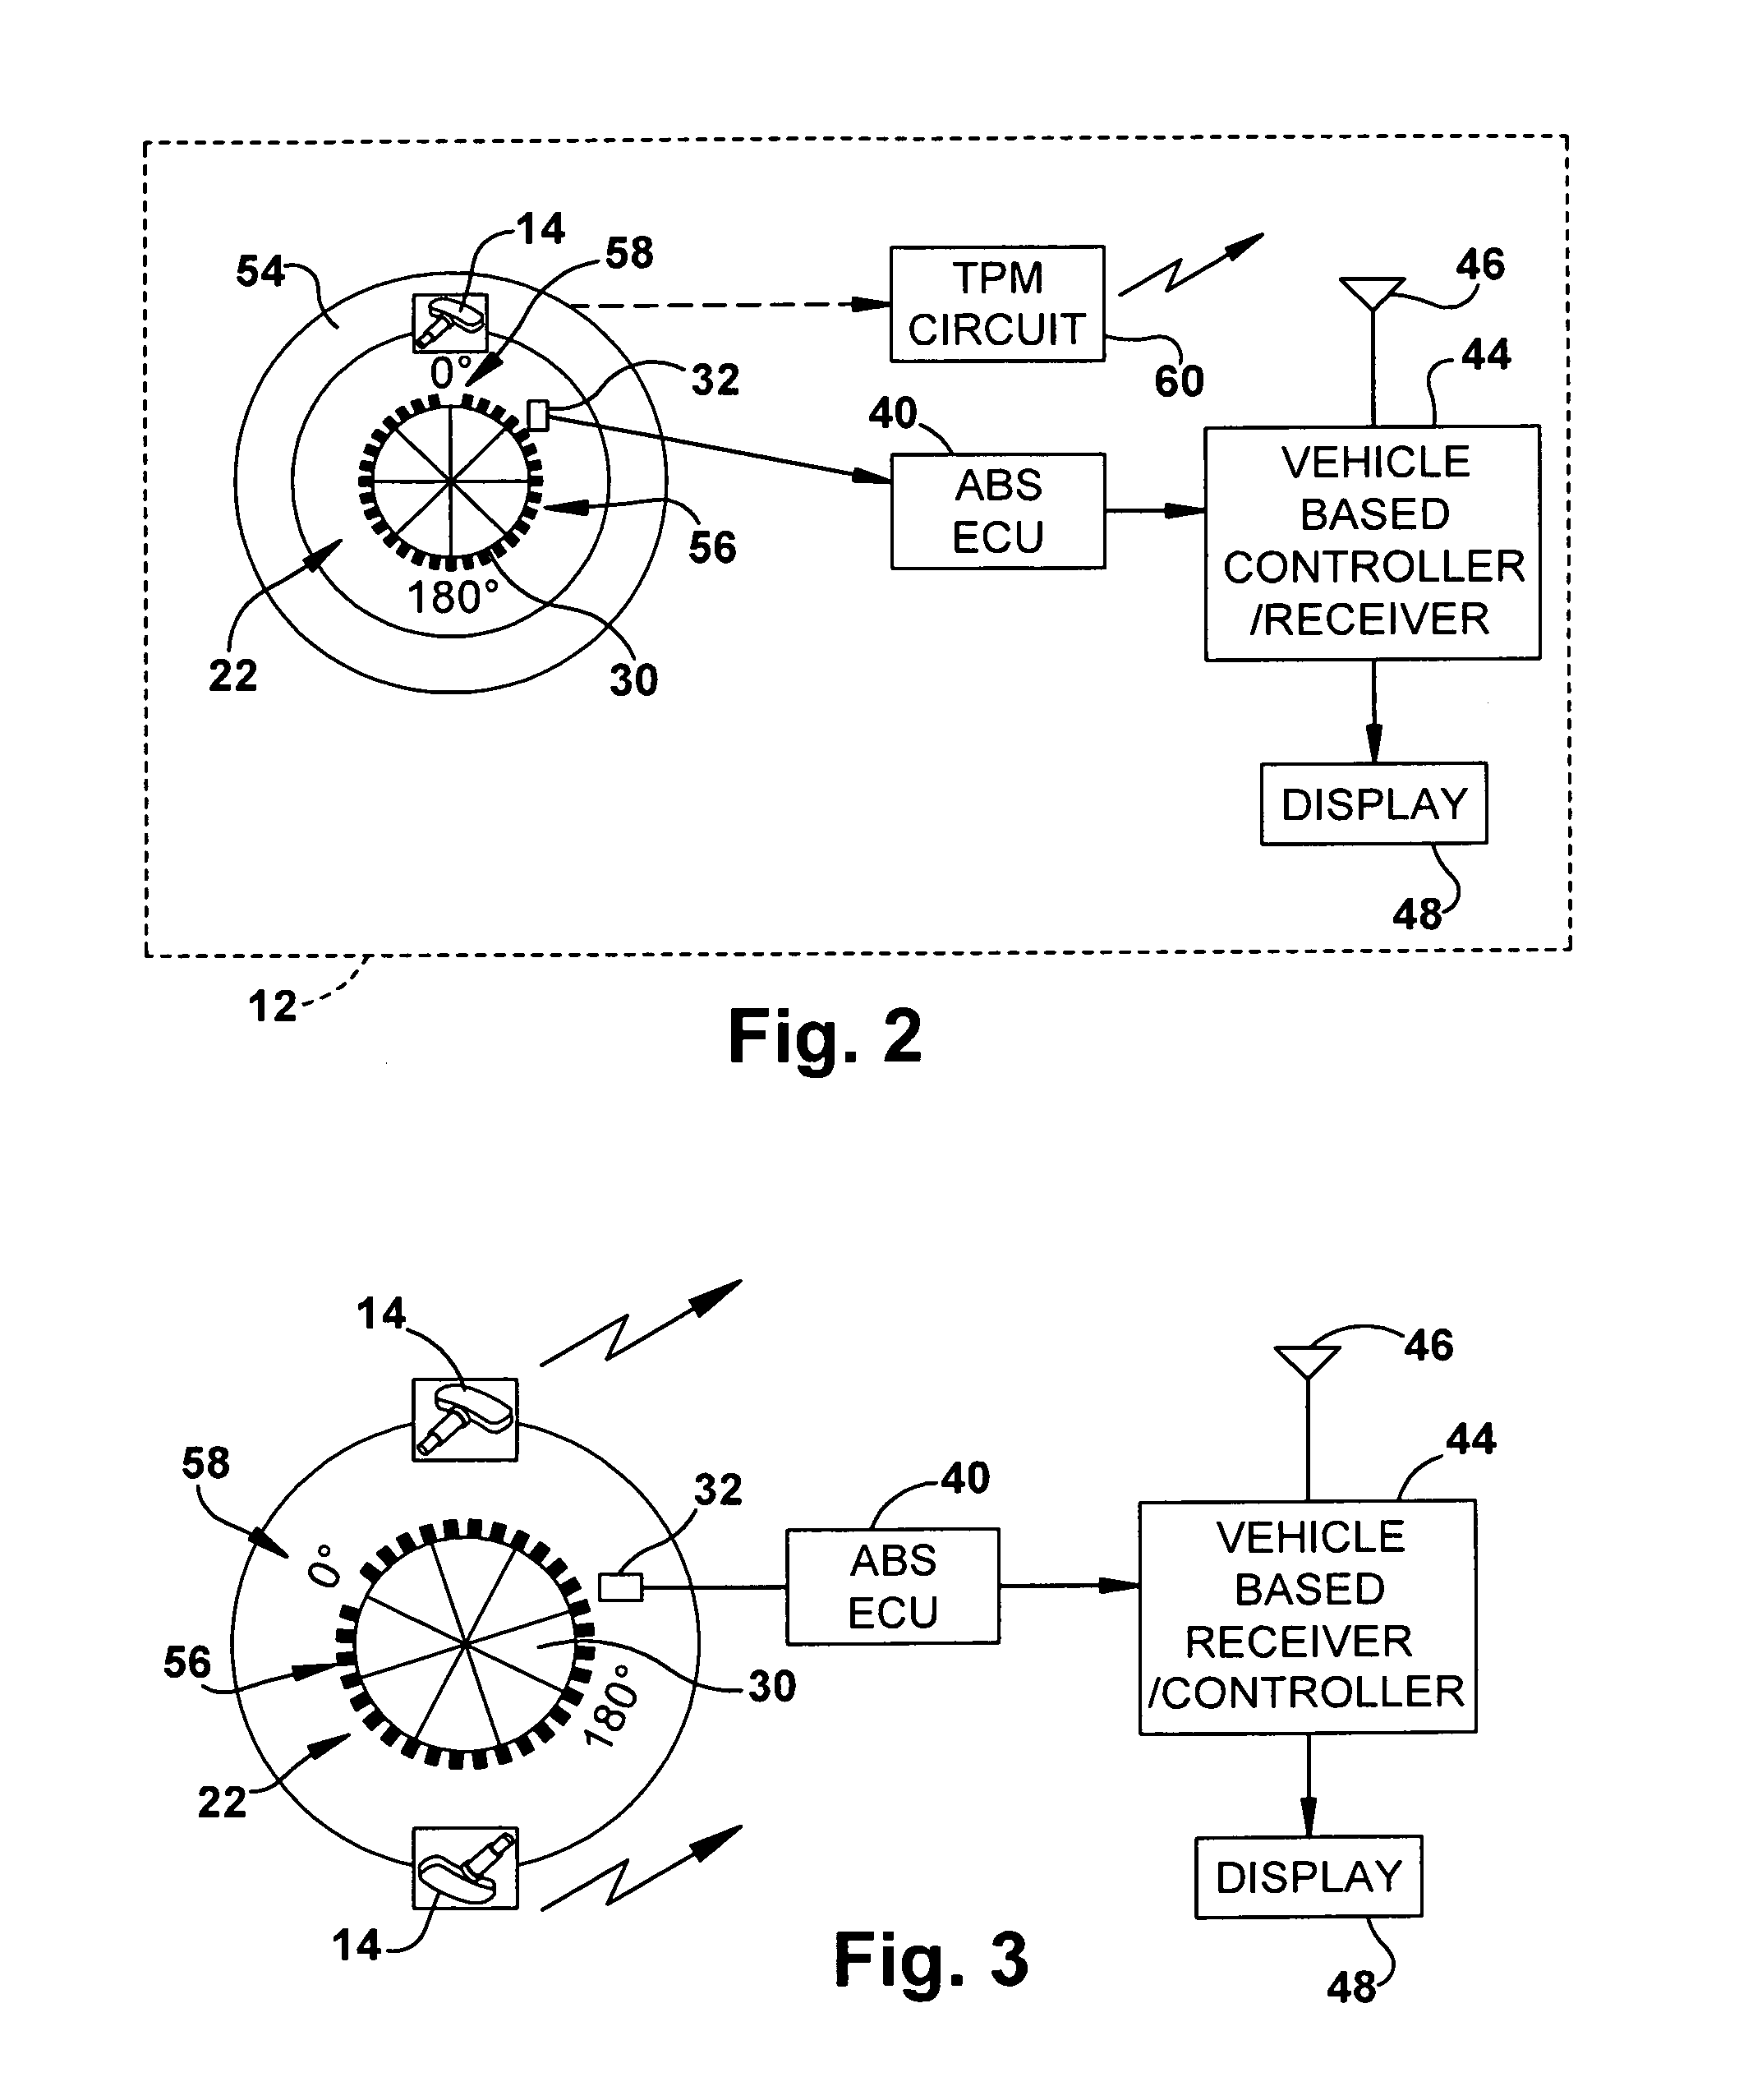 Method and apparatus for determining tire condition and location